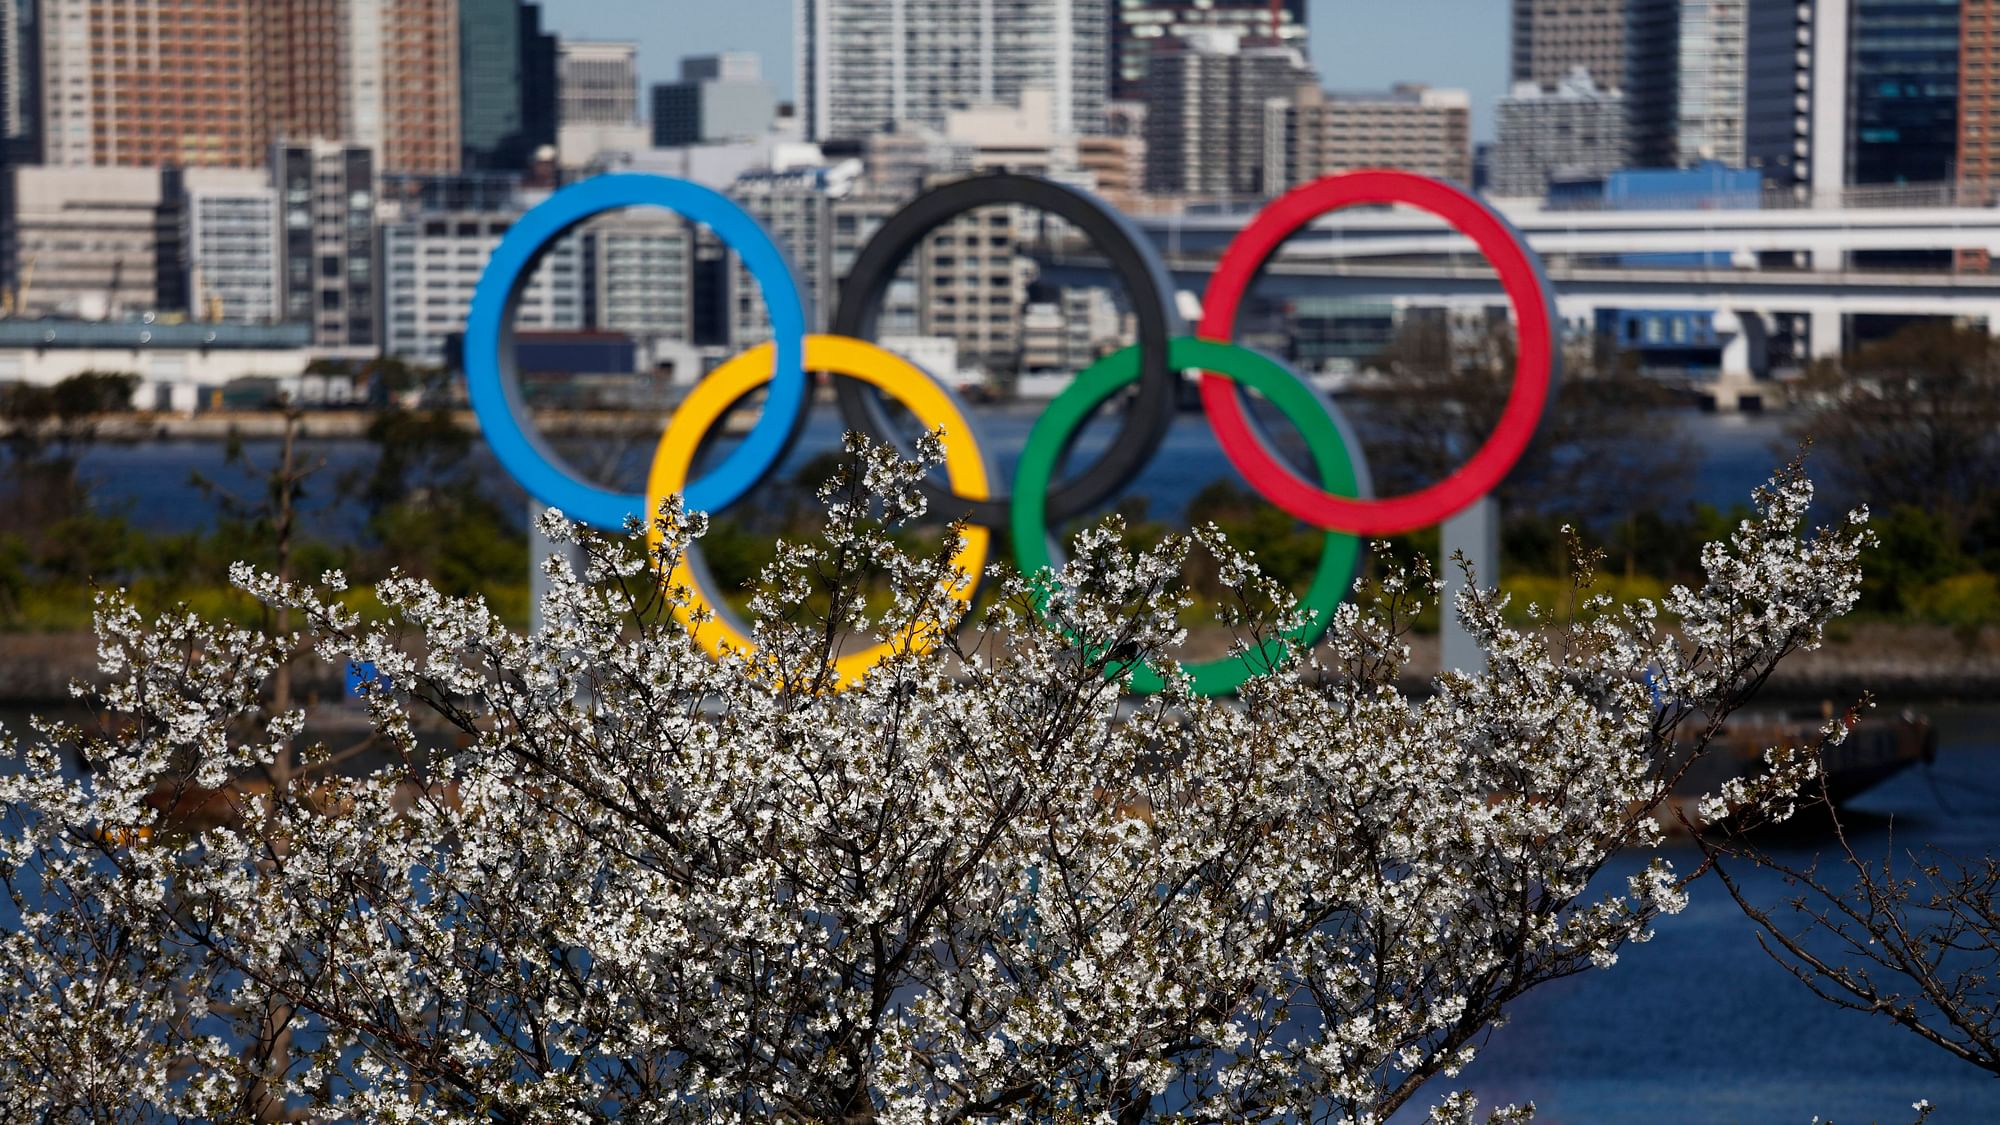 A look at some of the big questions after the postponement of the 2020 Tokyo Olympics.